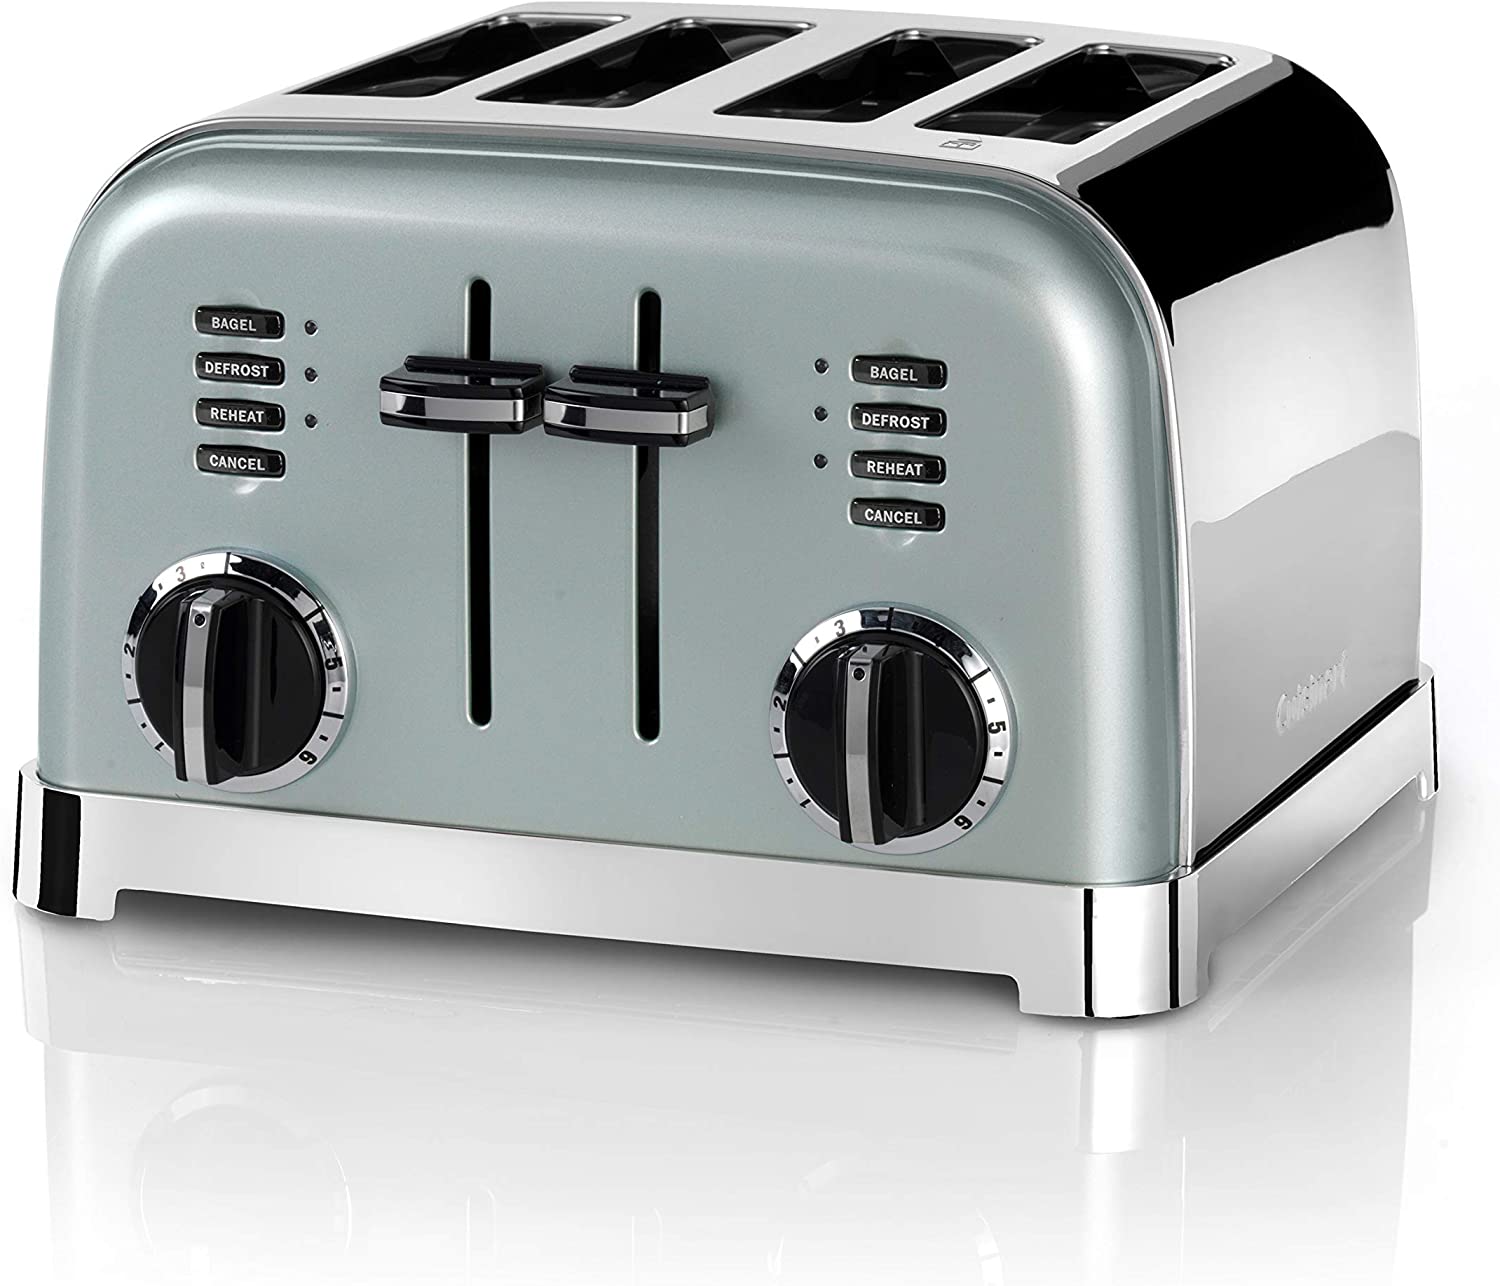 Cuisinart CPT180GE 4-Slot Toaster with 6 Browning Levels and Defrosting, Warming and Stop Function, Extra Wide Toast Slots, Retro Design, Green